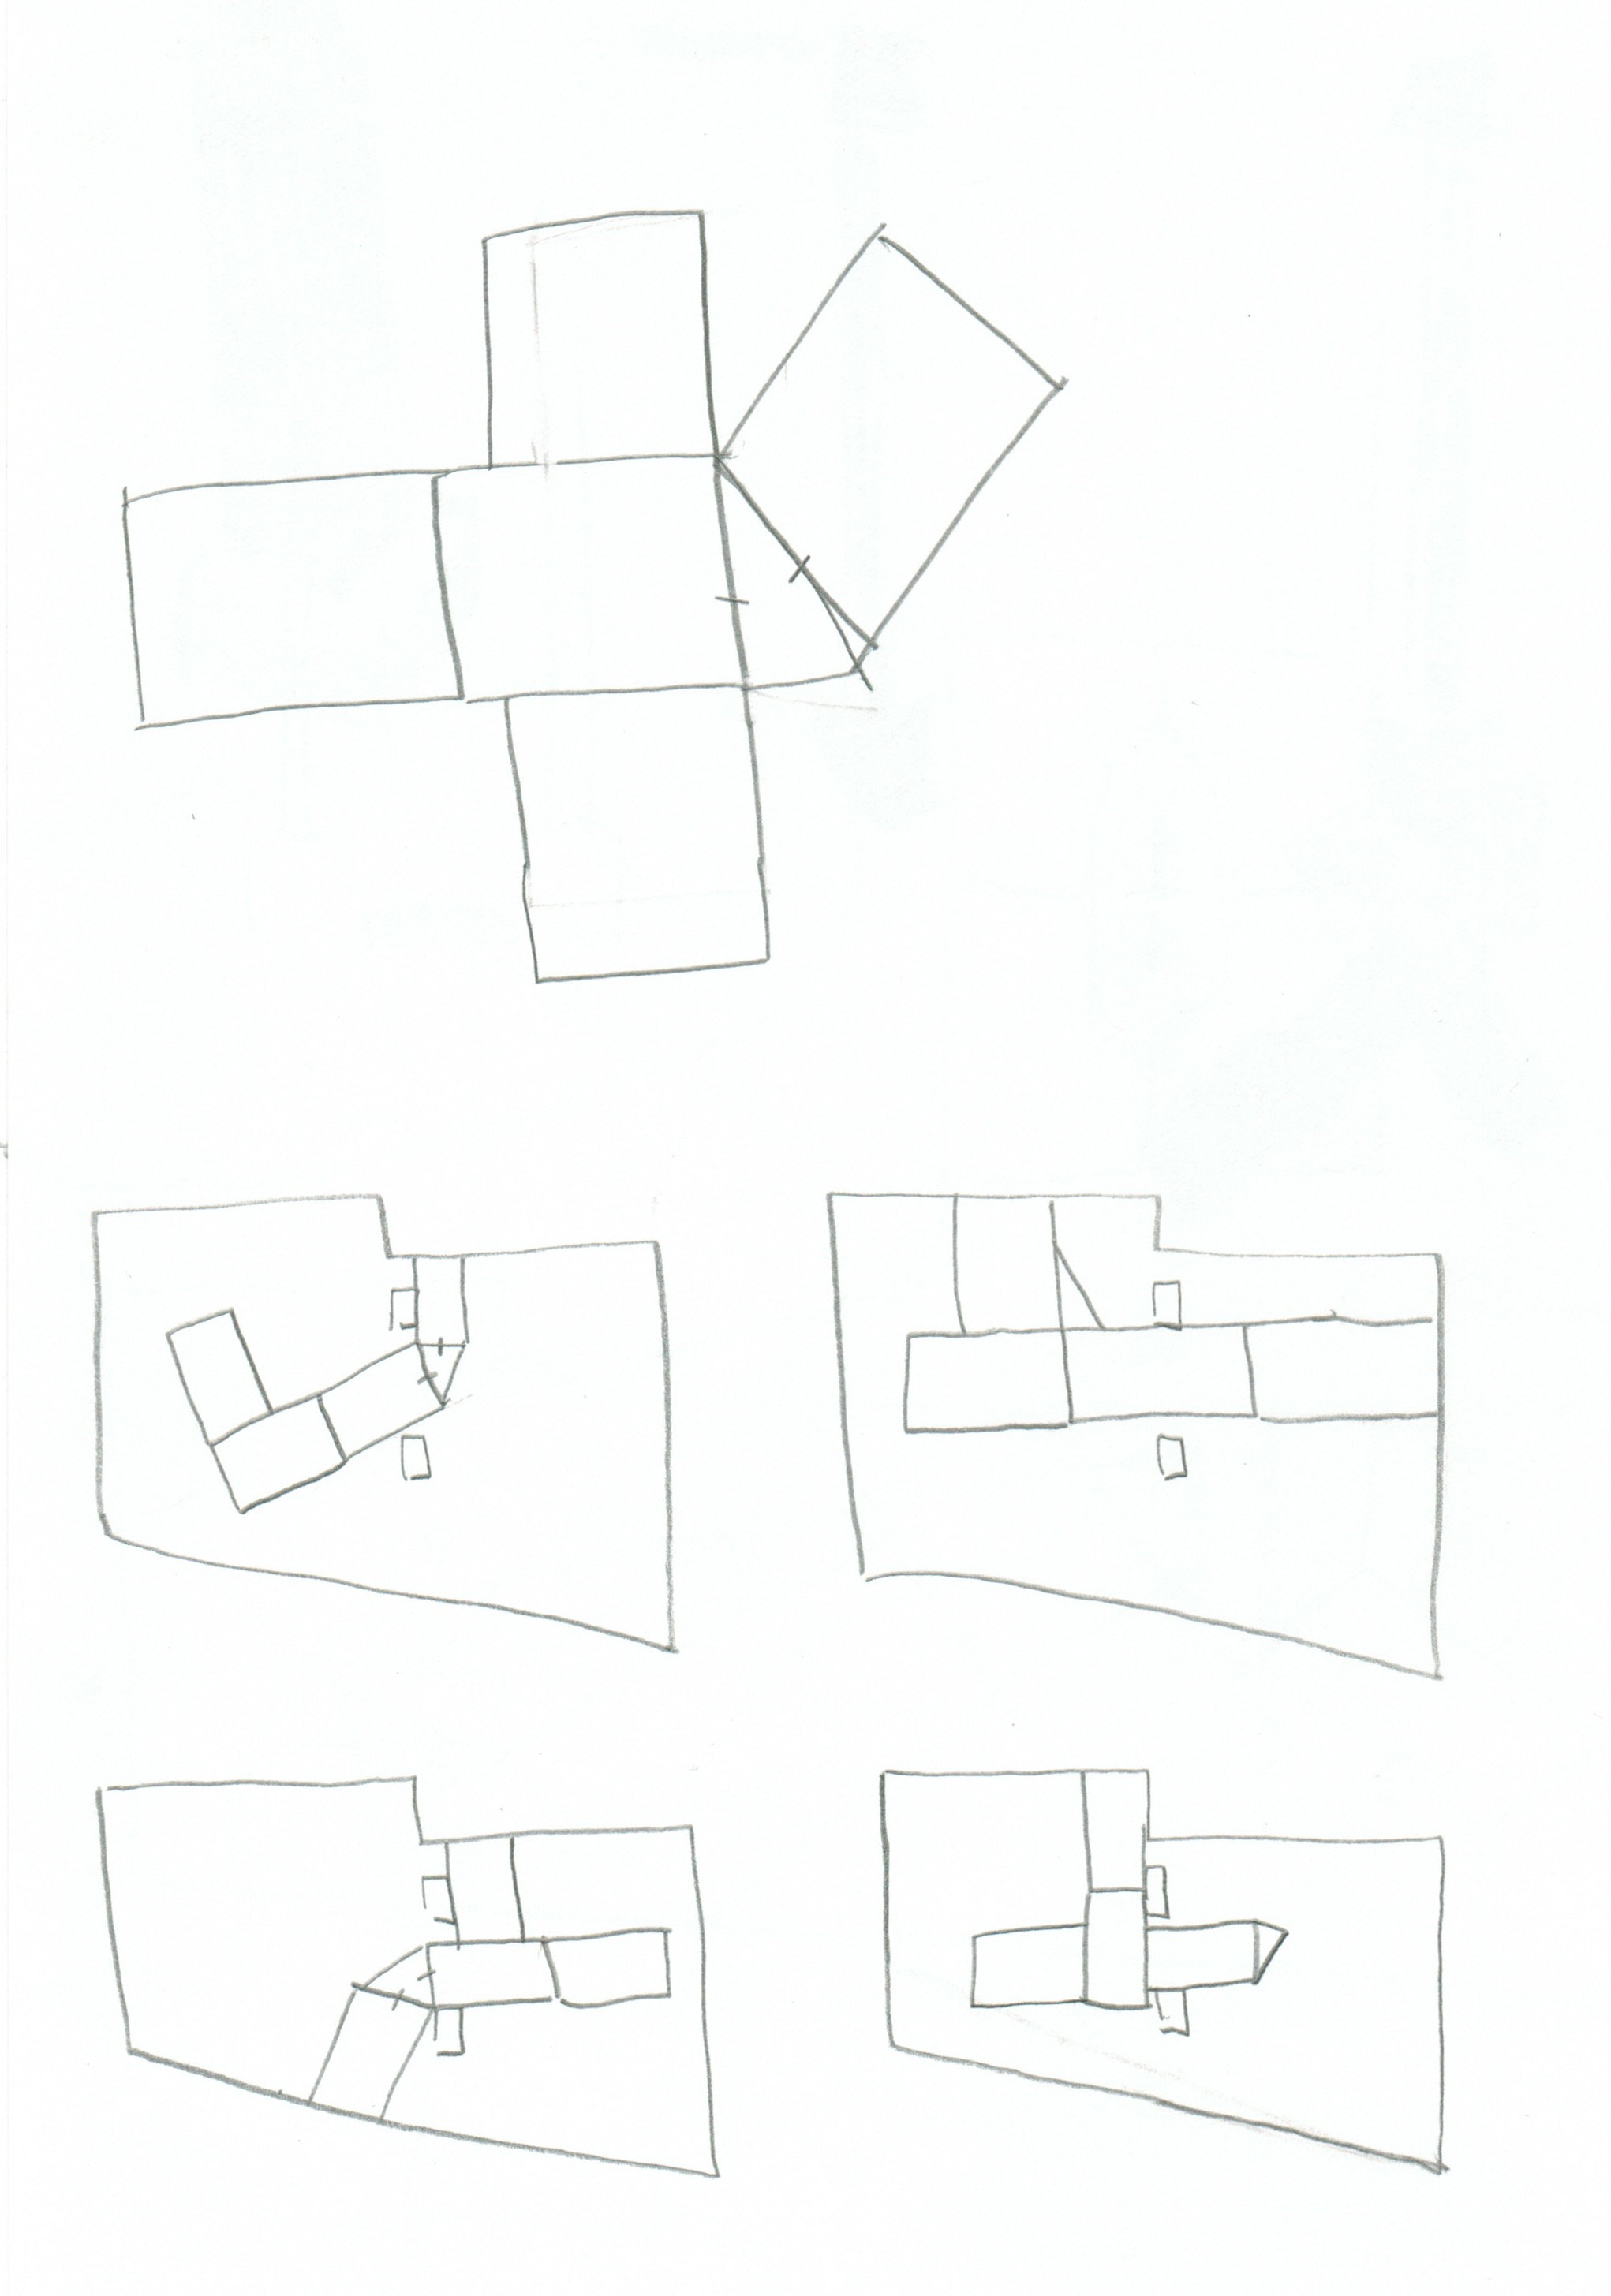 plan drawing in pencil of different rug configurations